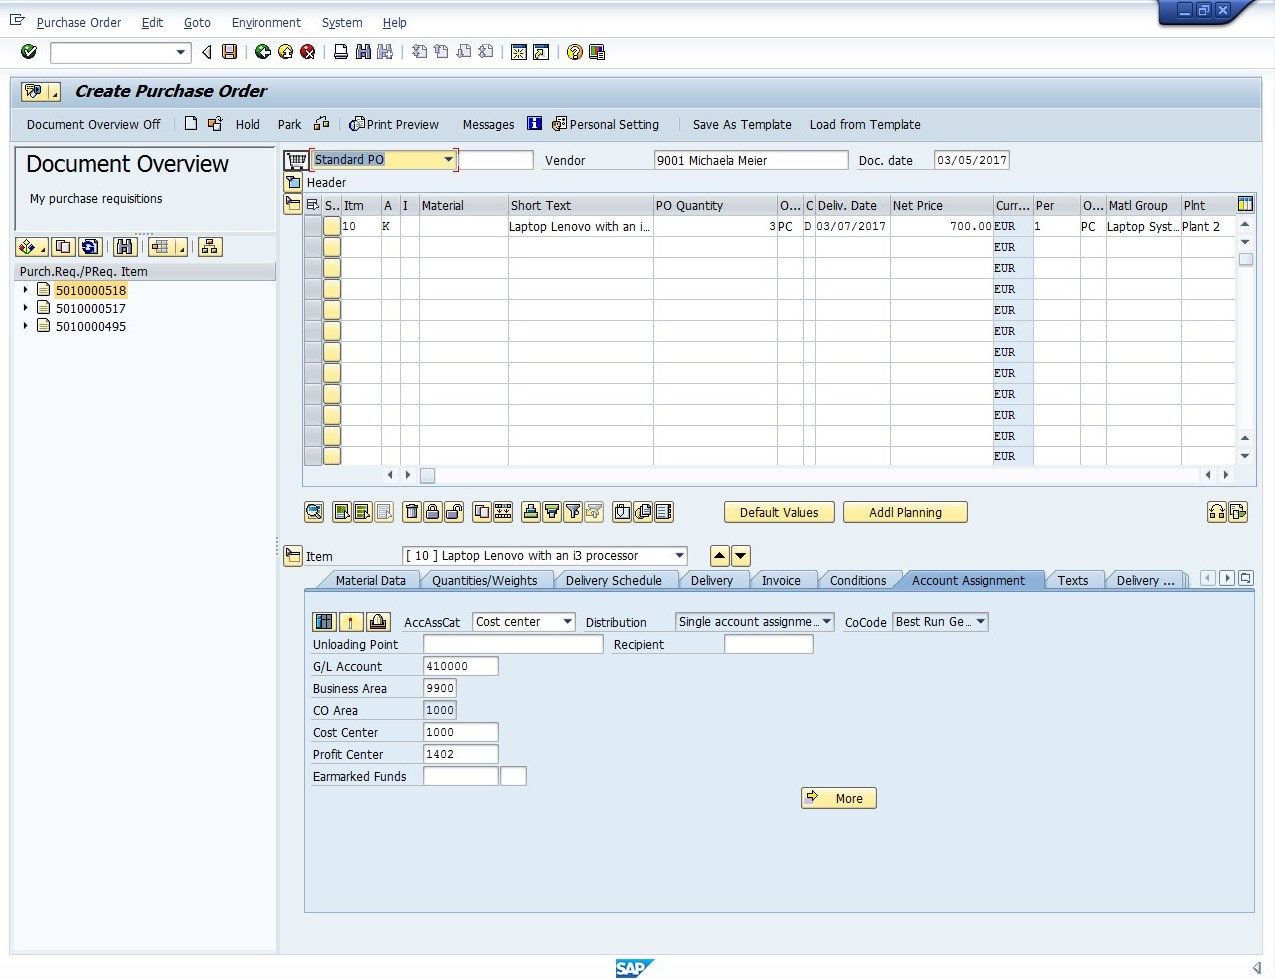 Conversion of SAP Purchase Requisition to SAP Purchase Order